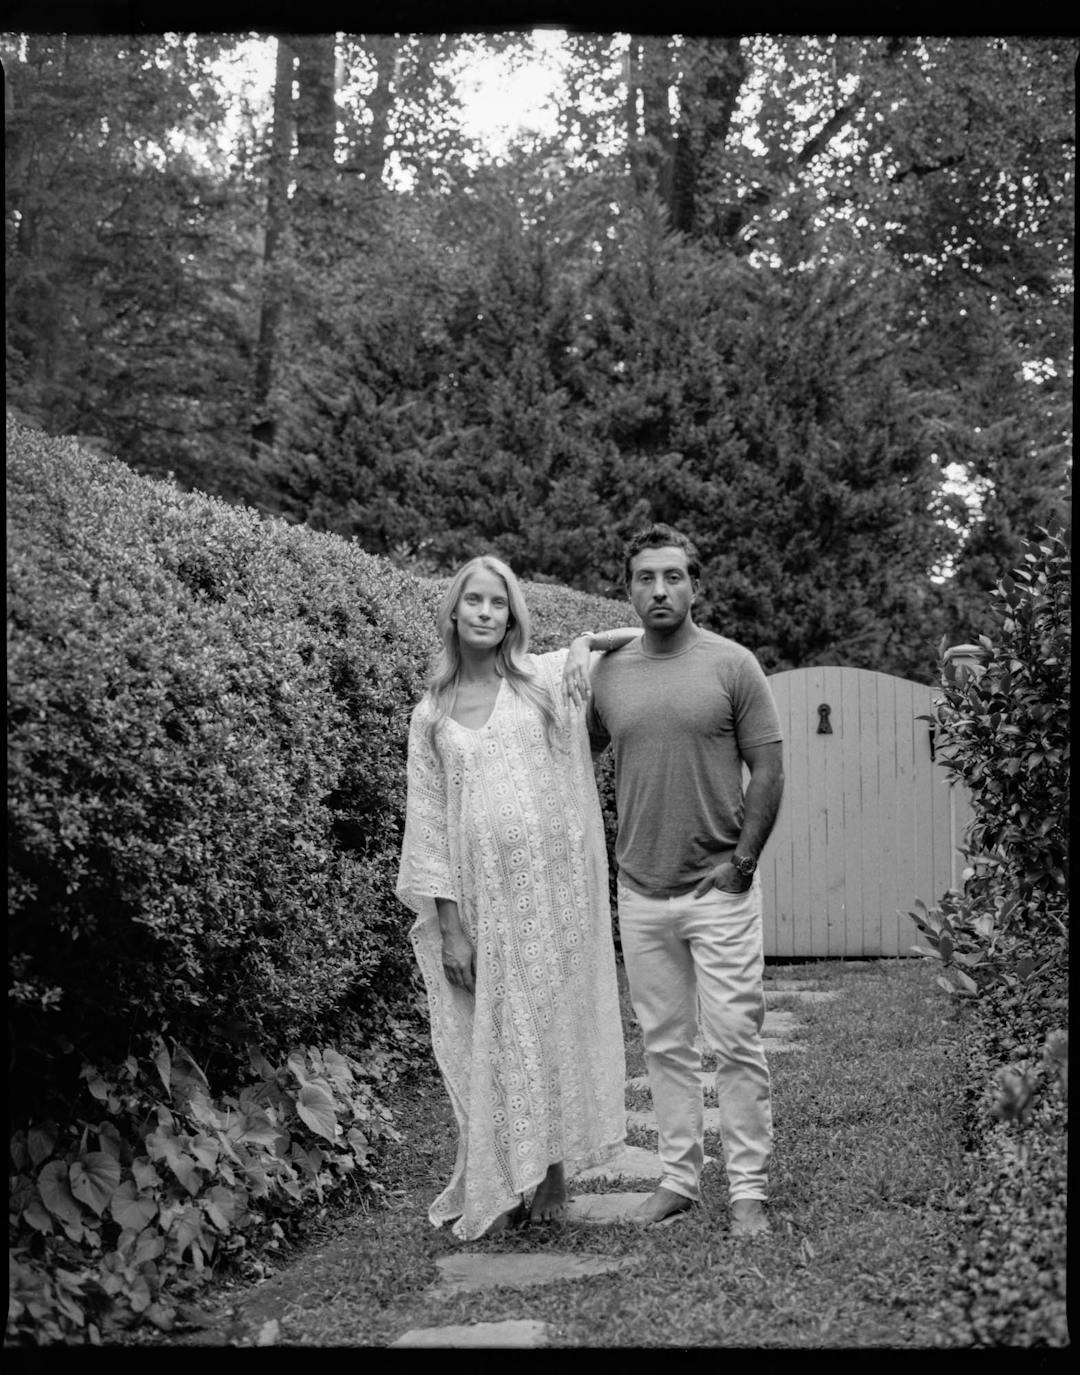 black and white medium format maternity portrait of woman in white dress holding belly with man 